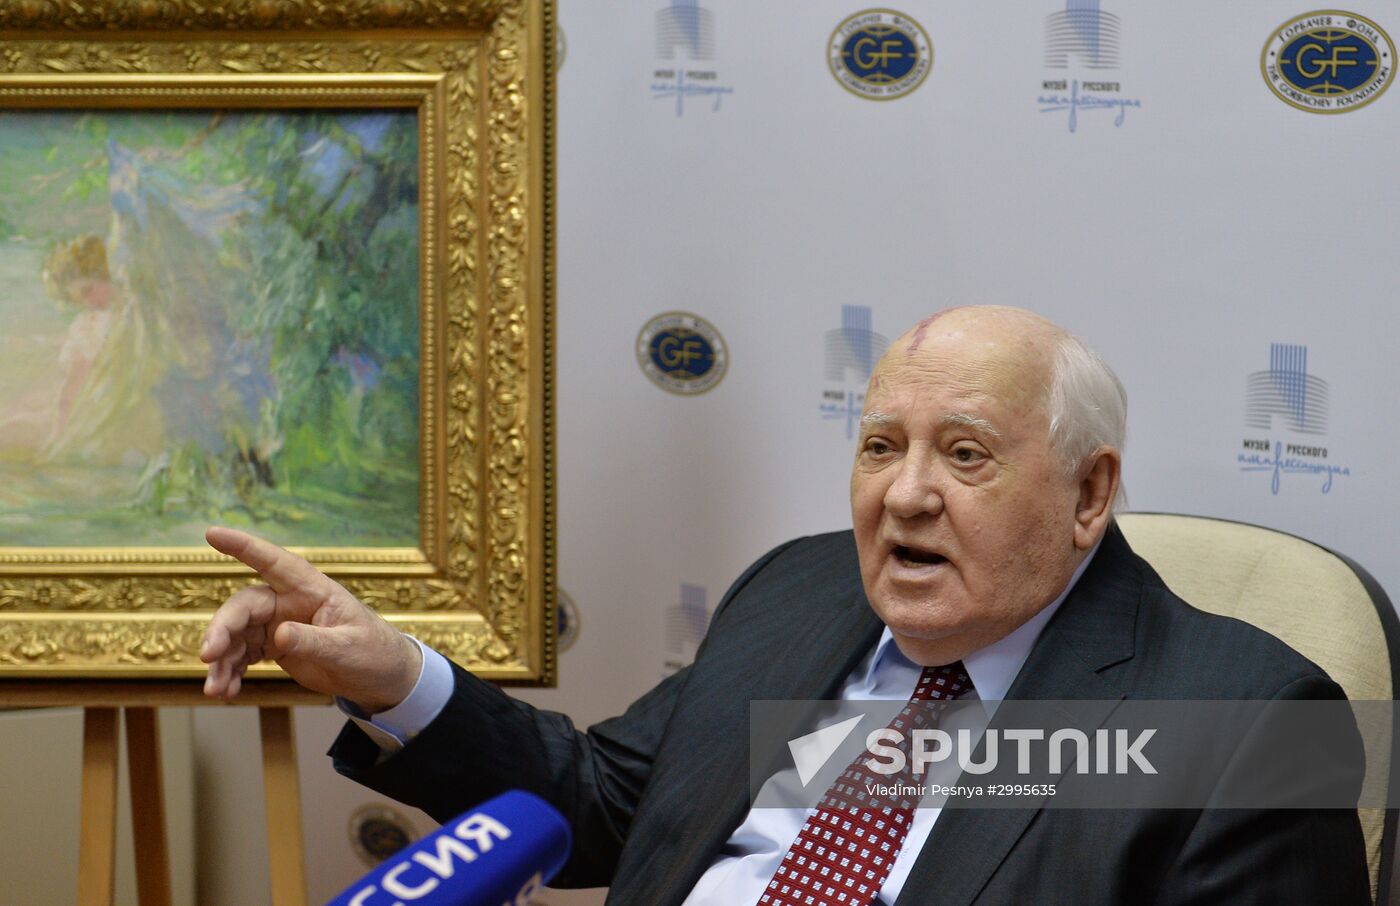 Mikhail Gorbachev hands out pictures to Museum of Russian Impressionism